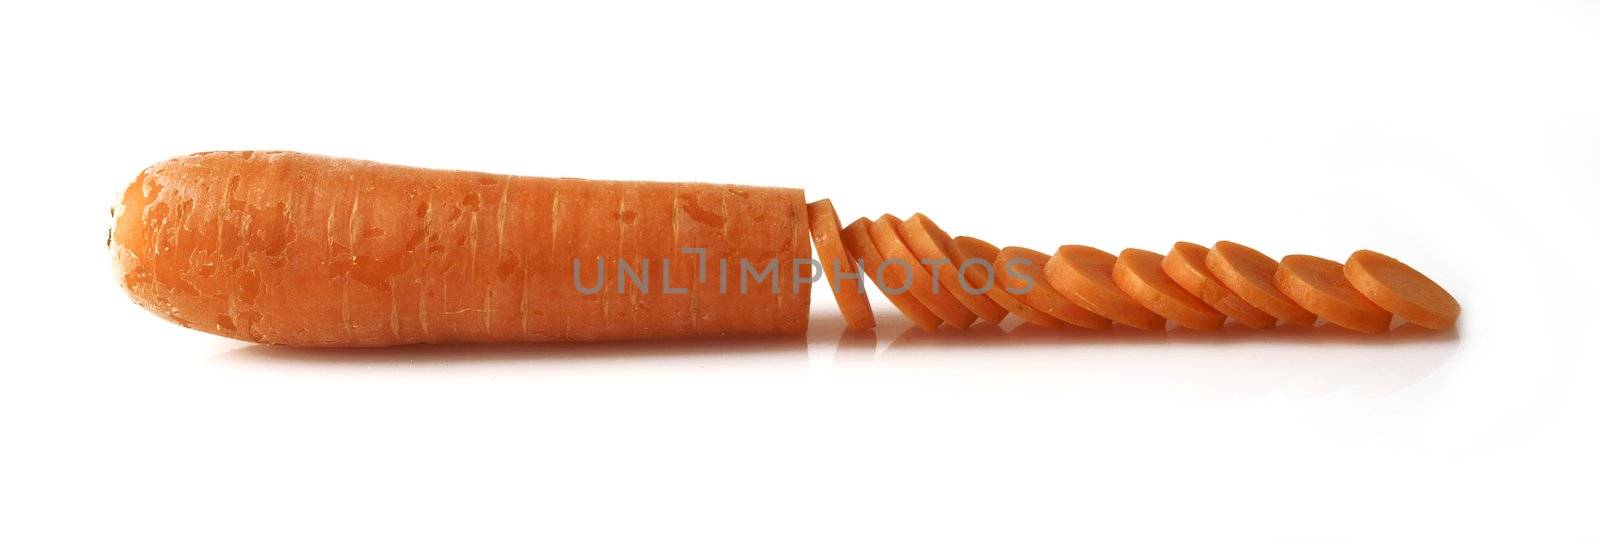 Closeup of partially sliced fresh organic carrot on white background